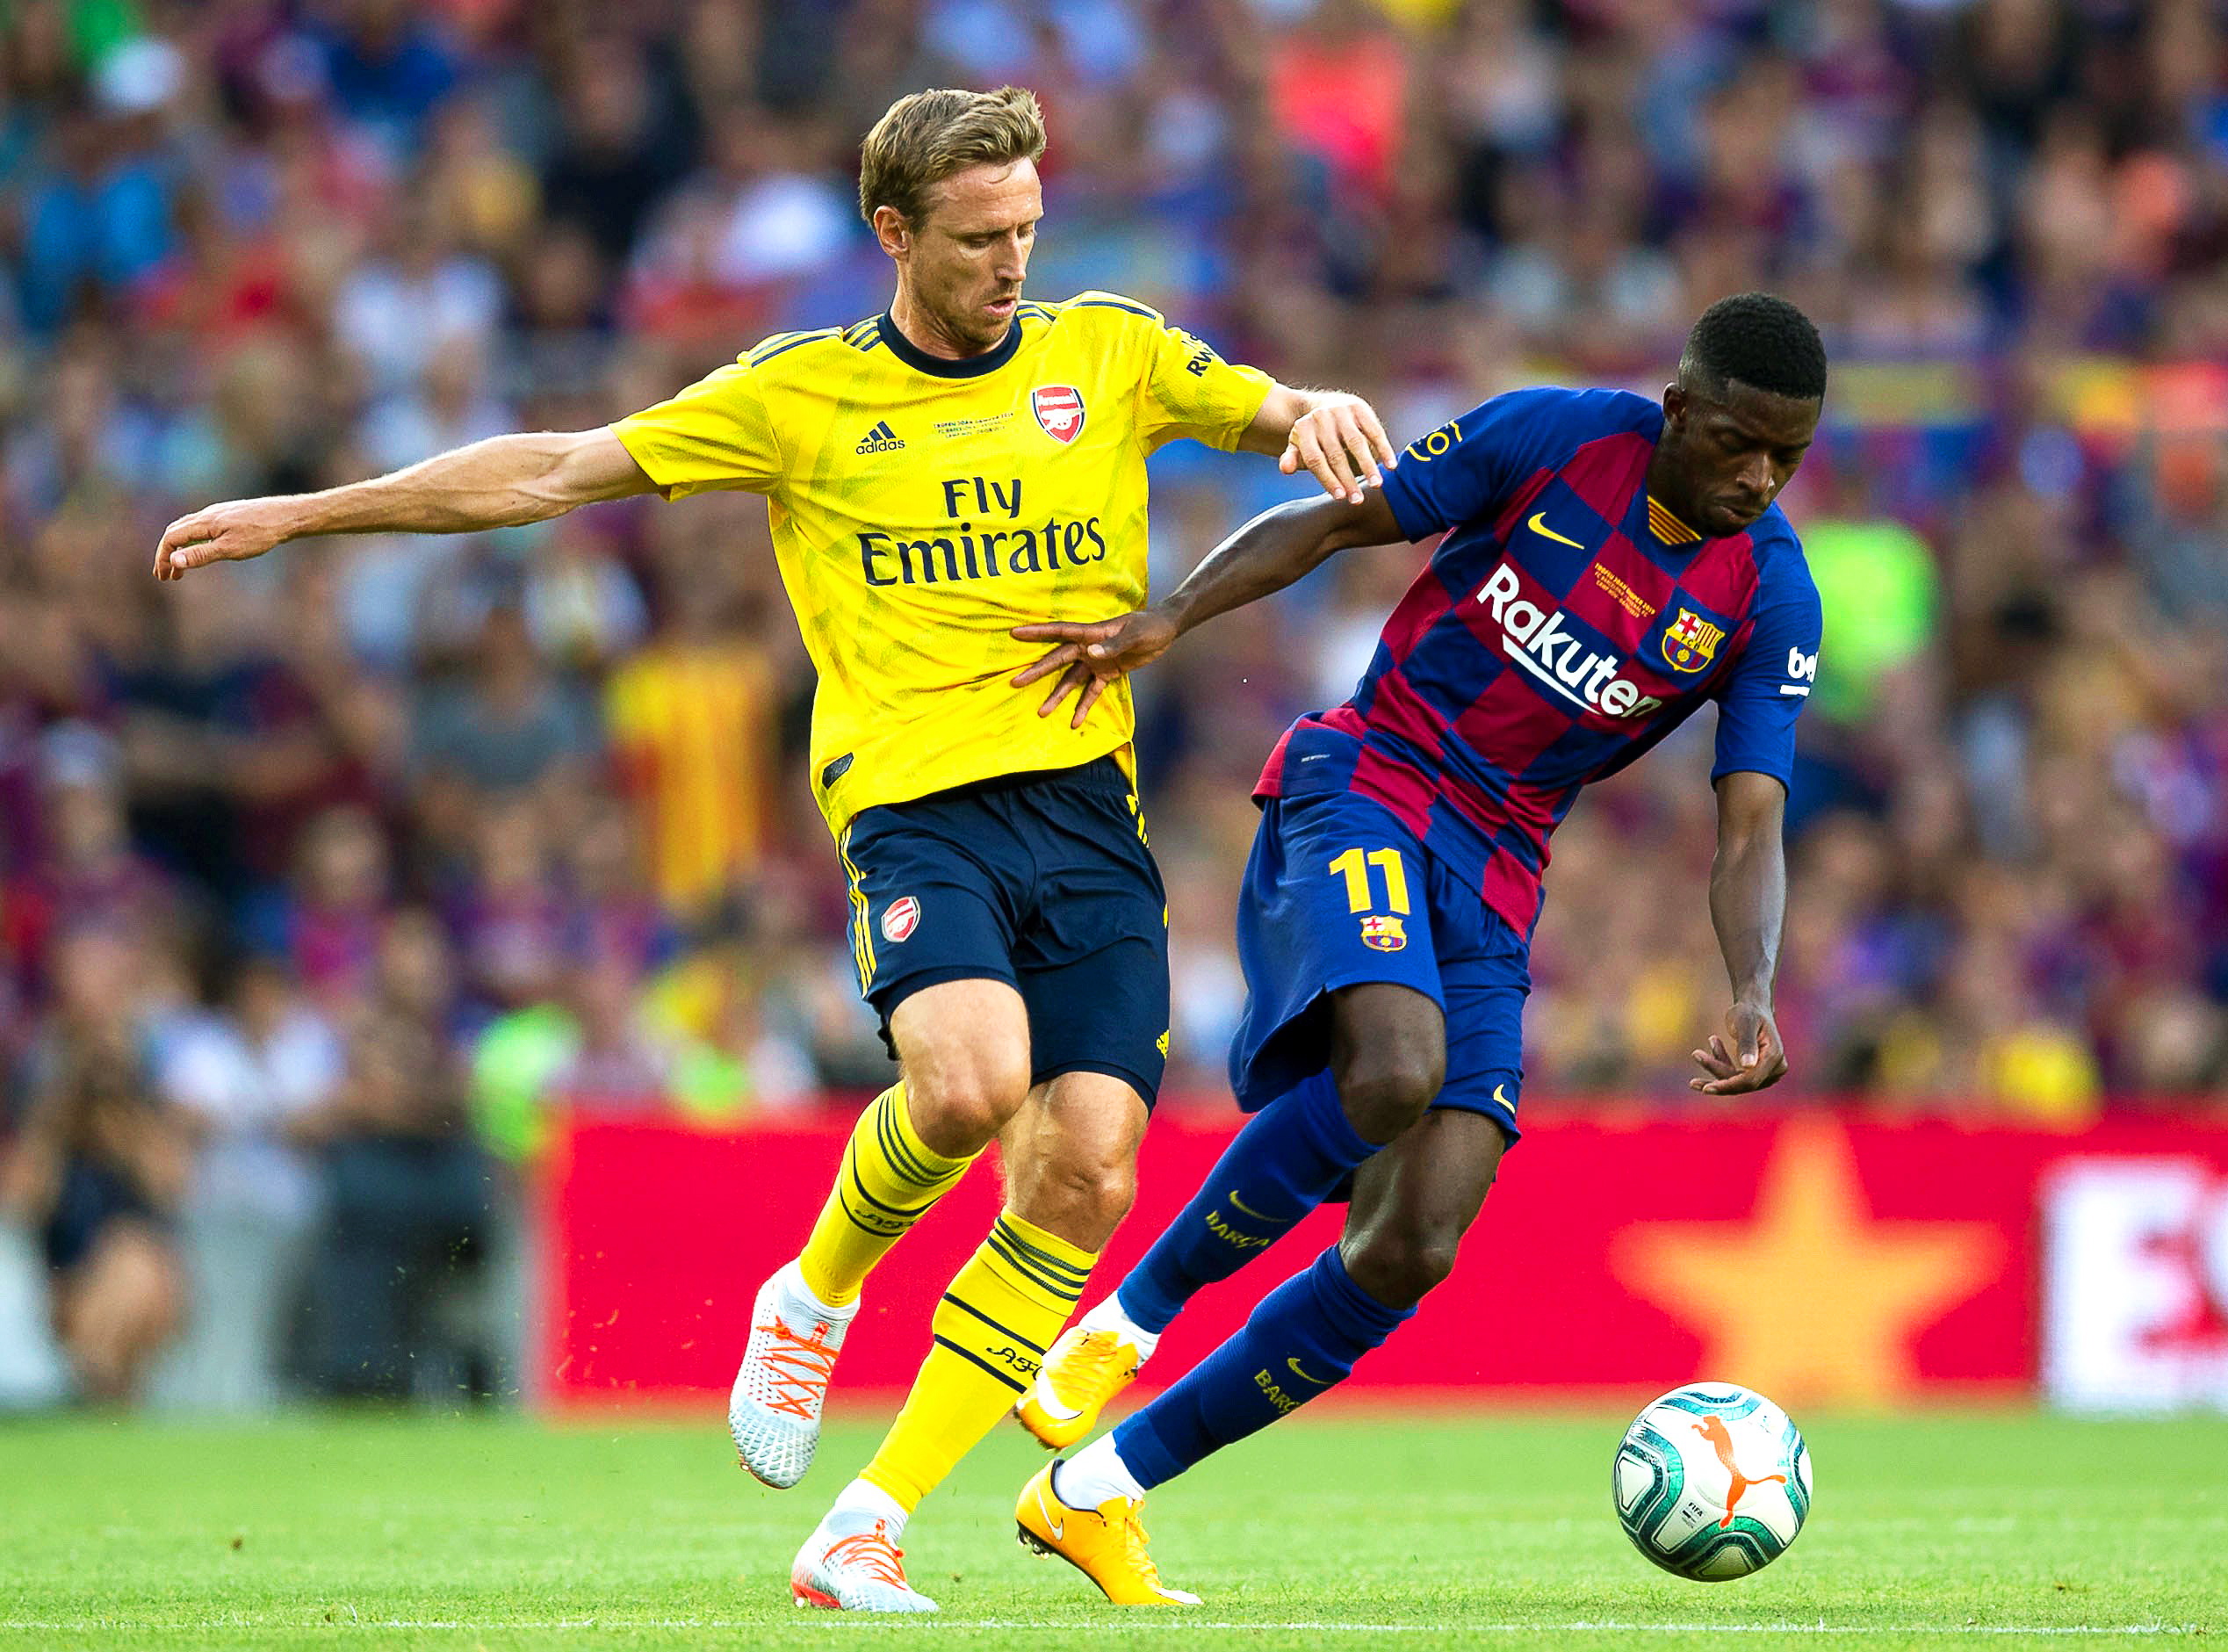 epa07756900 FC Barcelona's Ousmane Dembele (R) in action against Arsenal's Nacho Monreal (L) during the Joan Gamper Trophy soccer match between FC Barcelona and Arsenal FC at Camp Nou in Barcelona, Spain, 04 August 2019.  EPA/ENRIC FONTCUBERTA